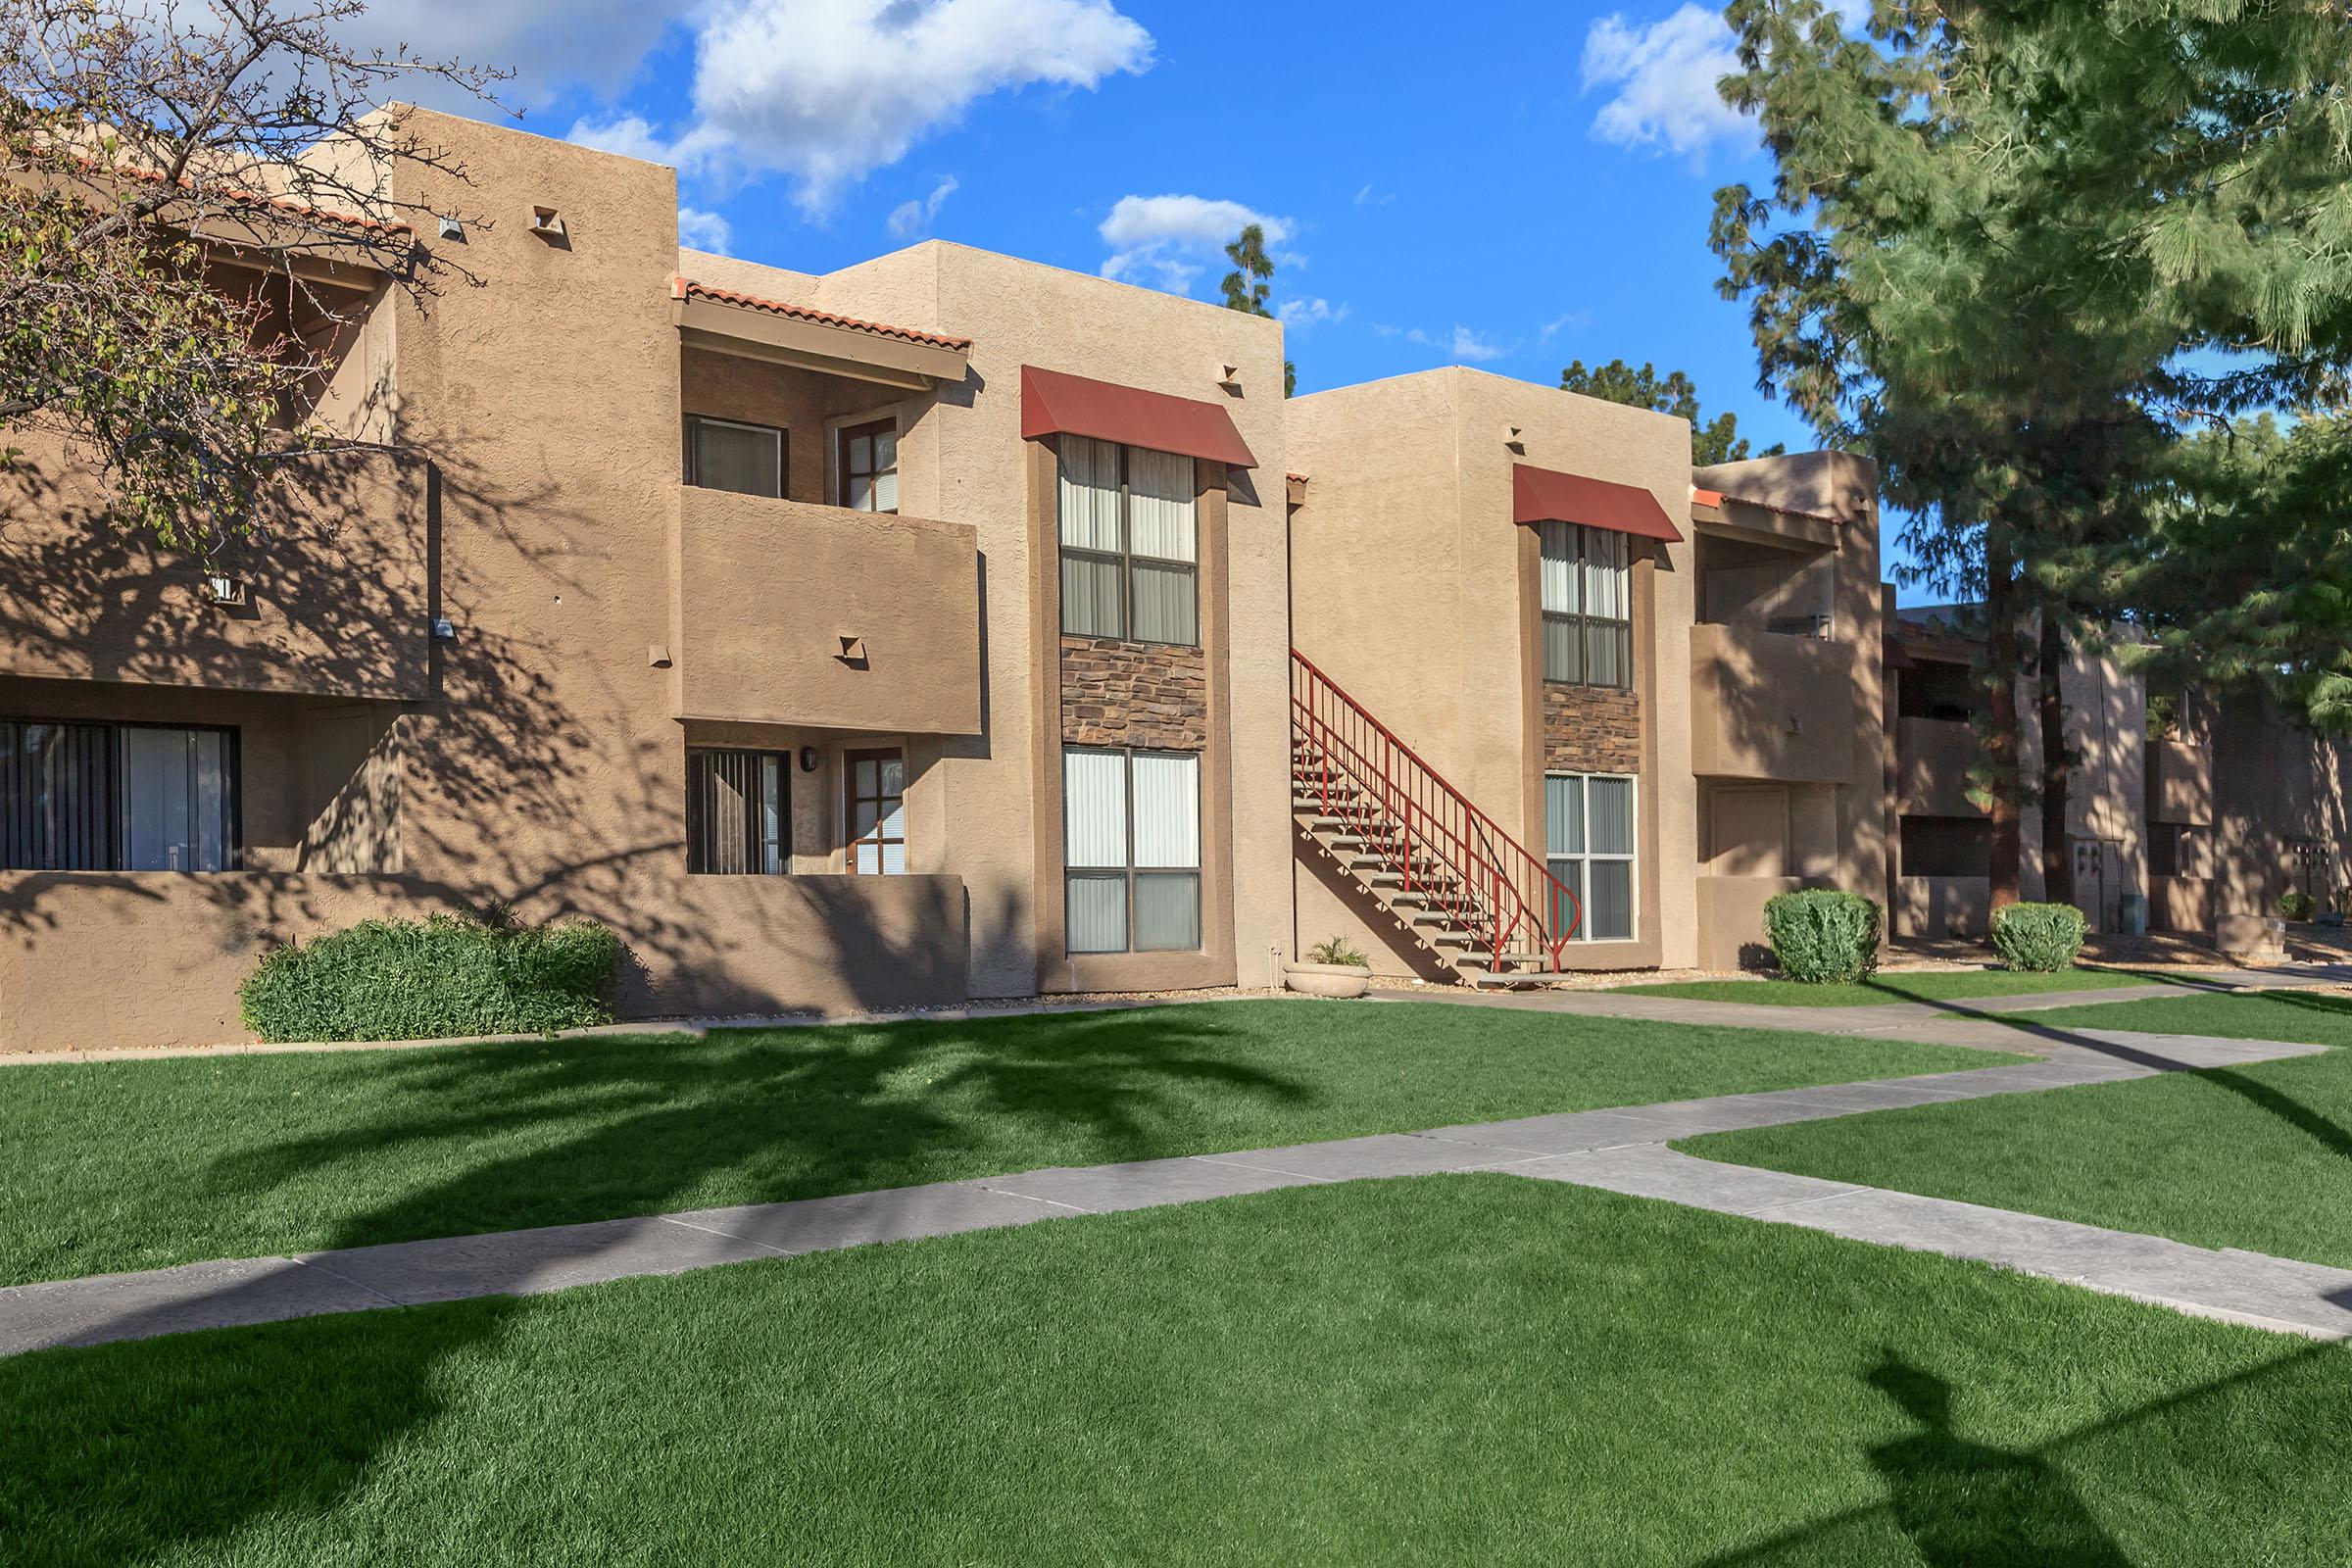 ONE AND TWO BEDROOM APARTMENTS IN PHOENIX, AZ